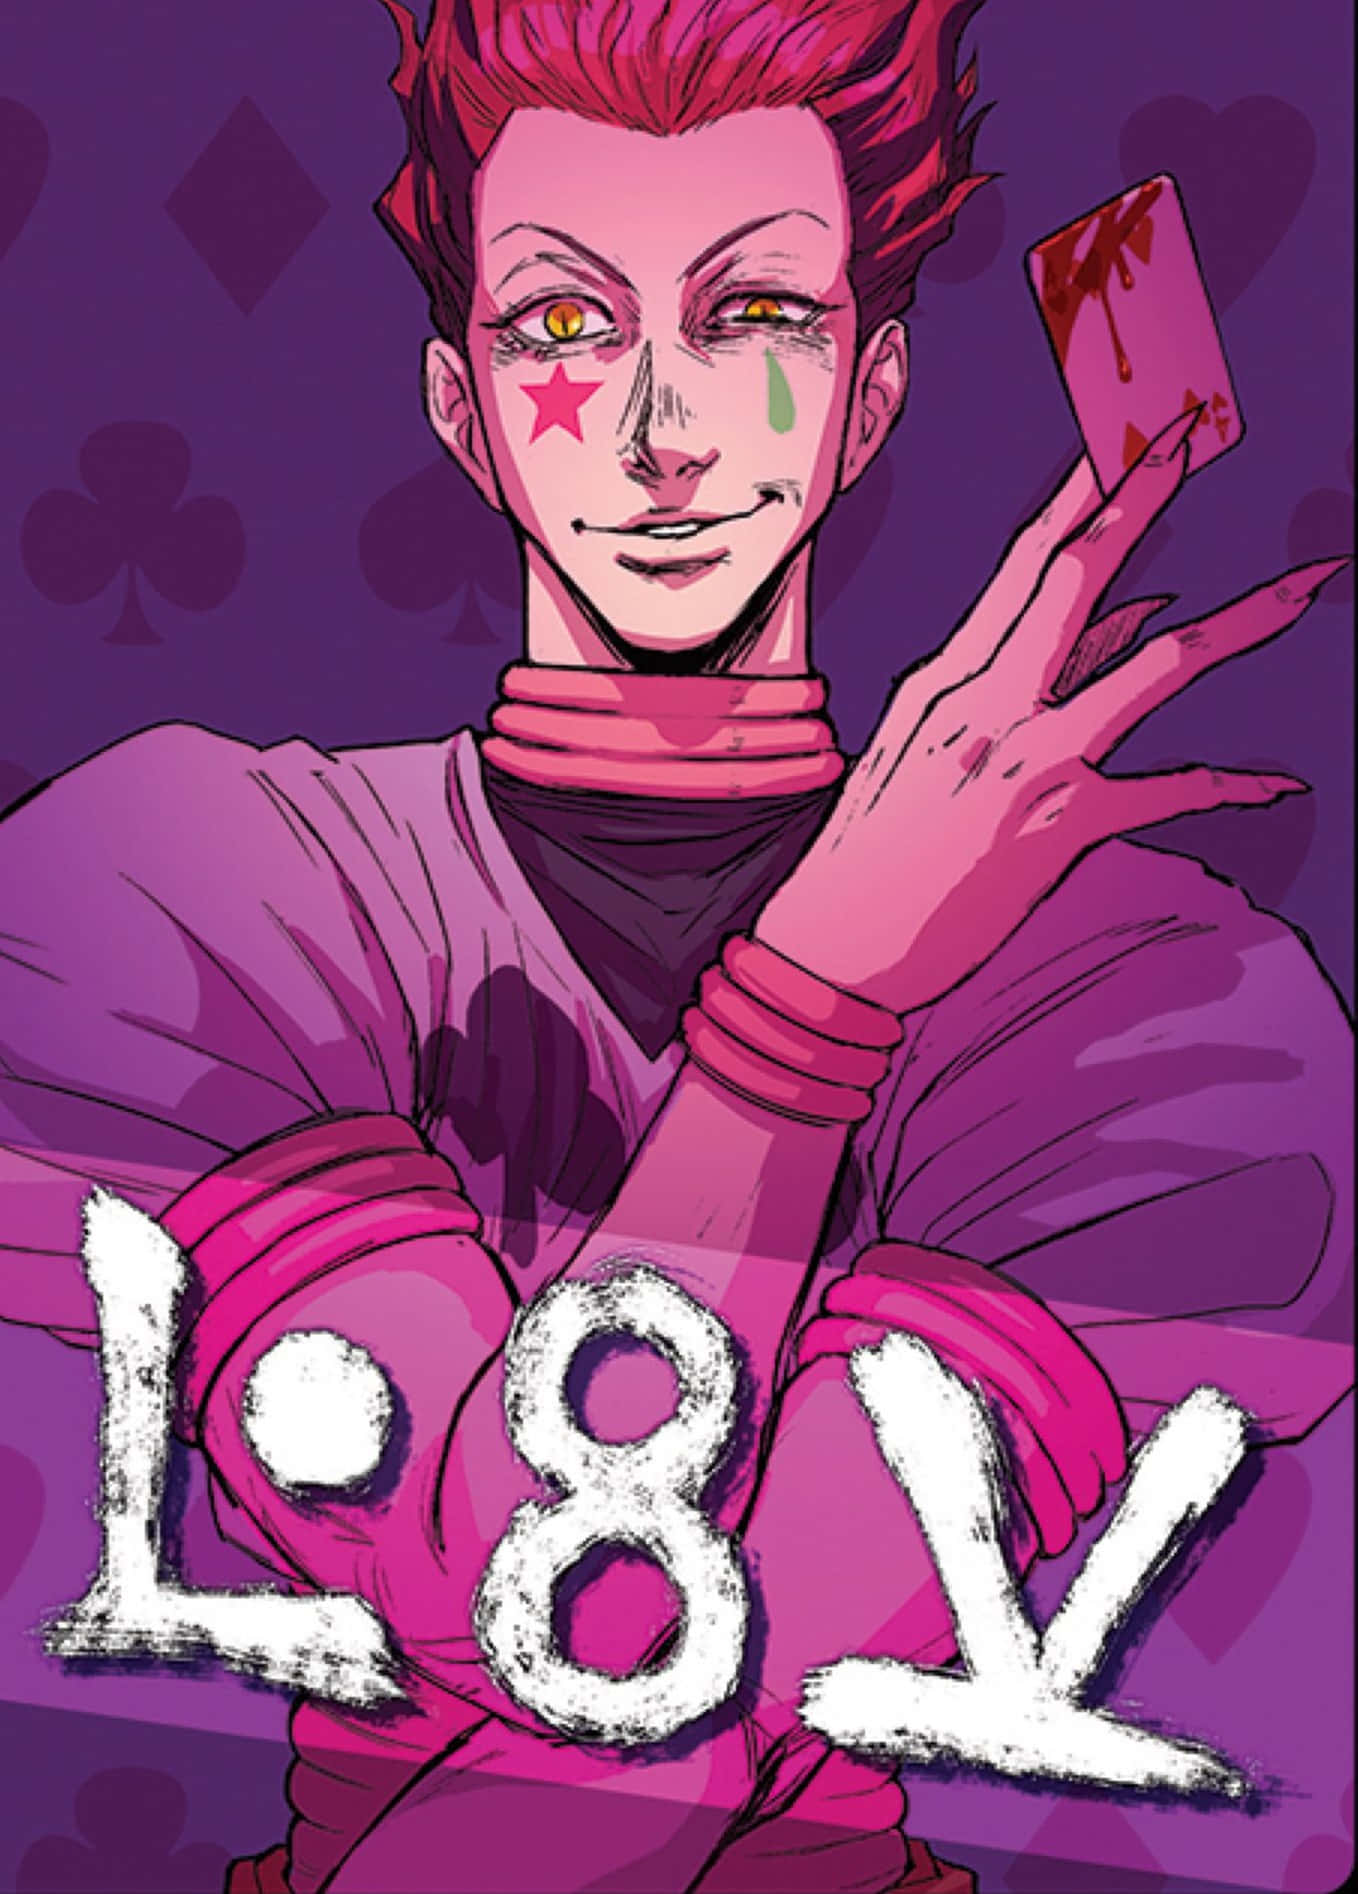 Hisoka: The Deadly Trickster